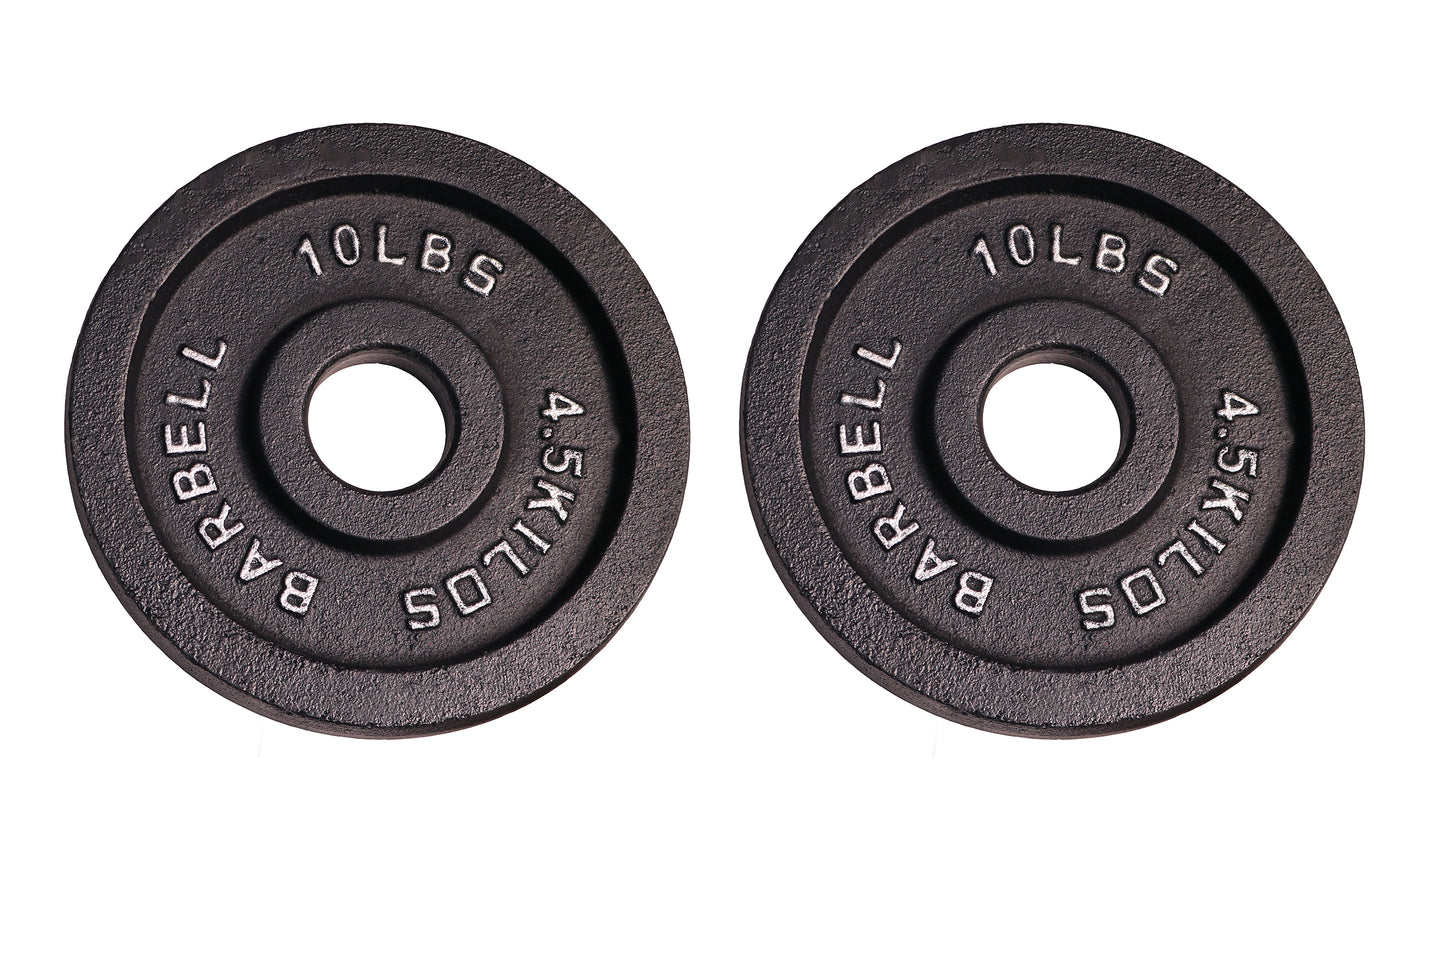 Deltech Fitness 10 lb Pair of Olympic Plates (OP-010)